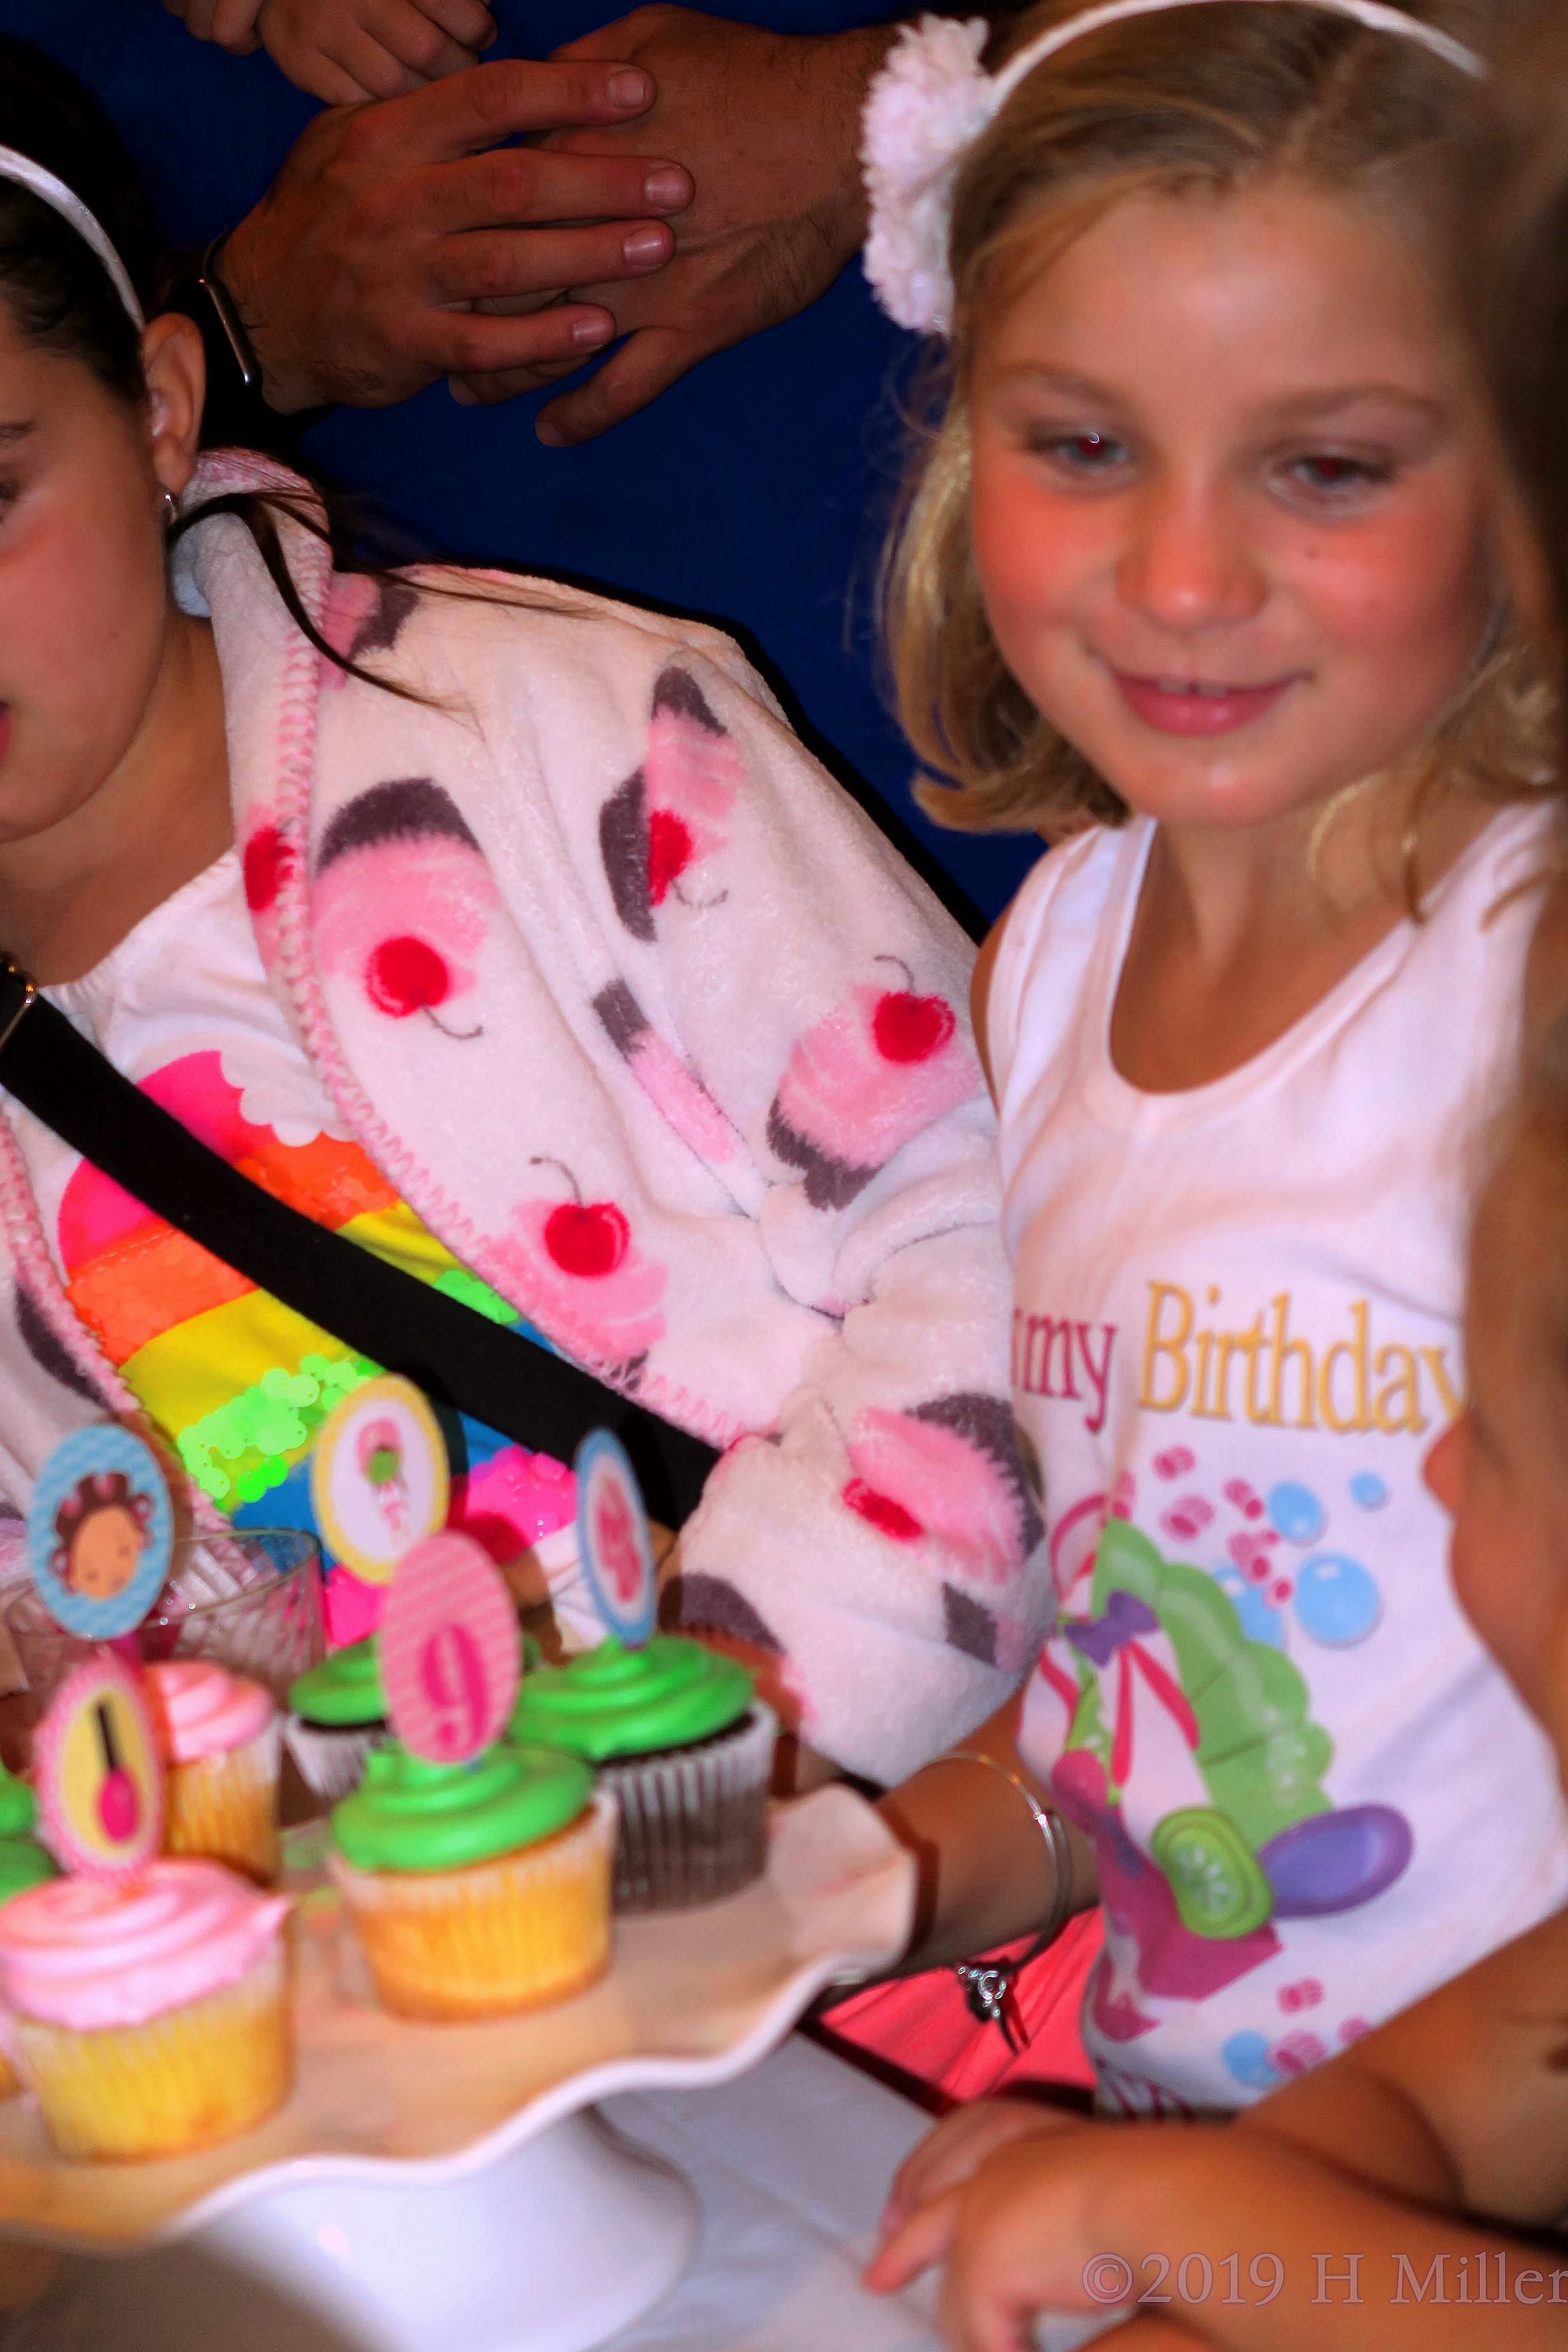 Candlelit Cupcakes At The Kids Spa Party! 4